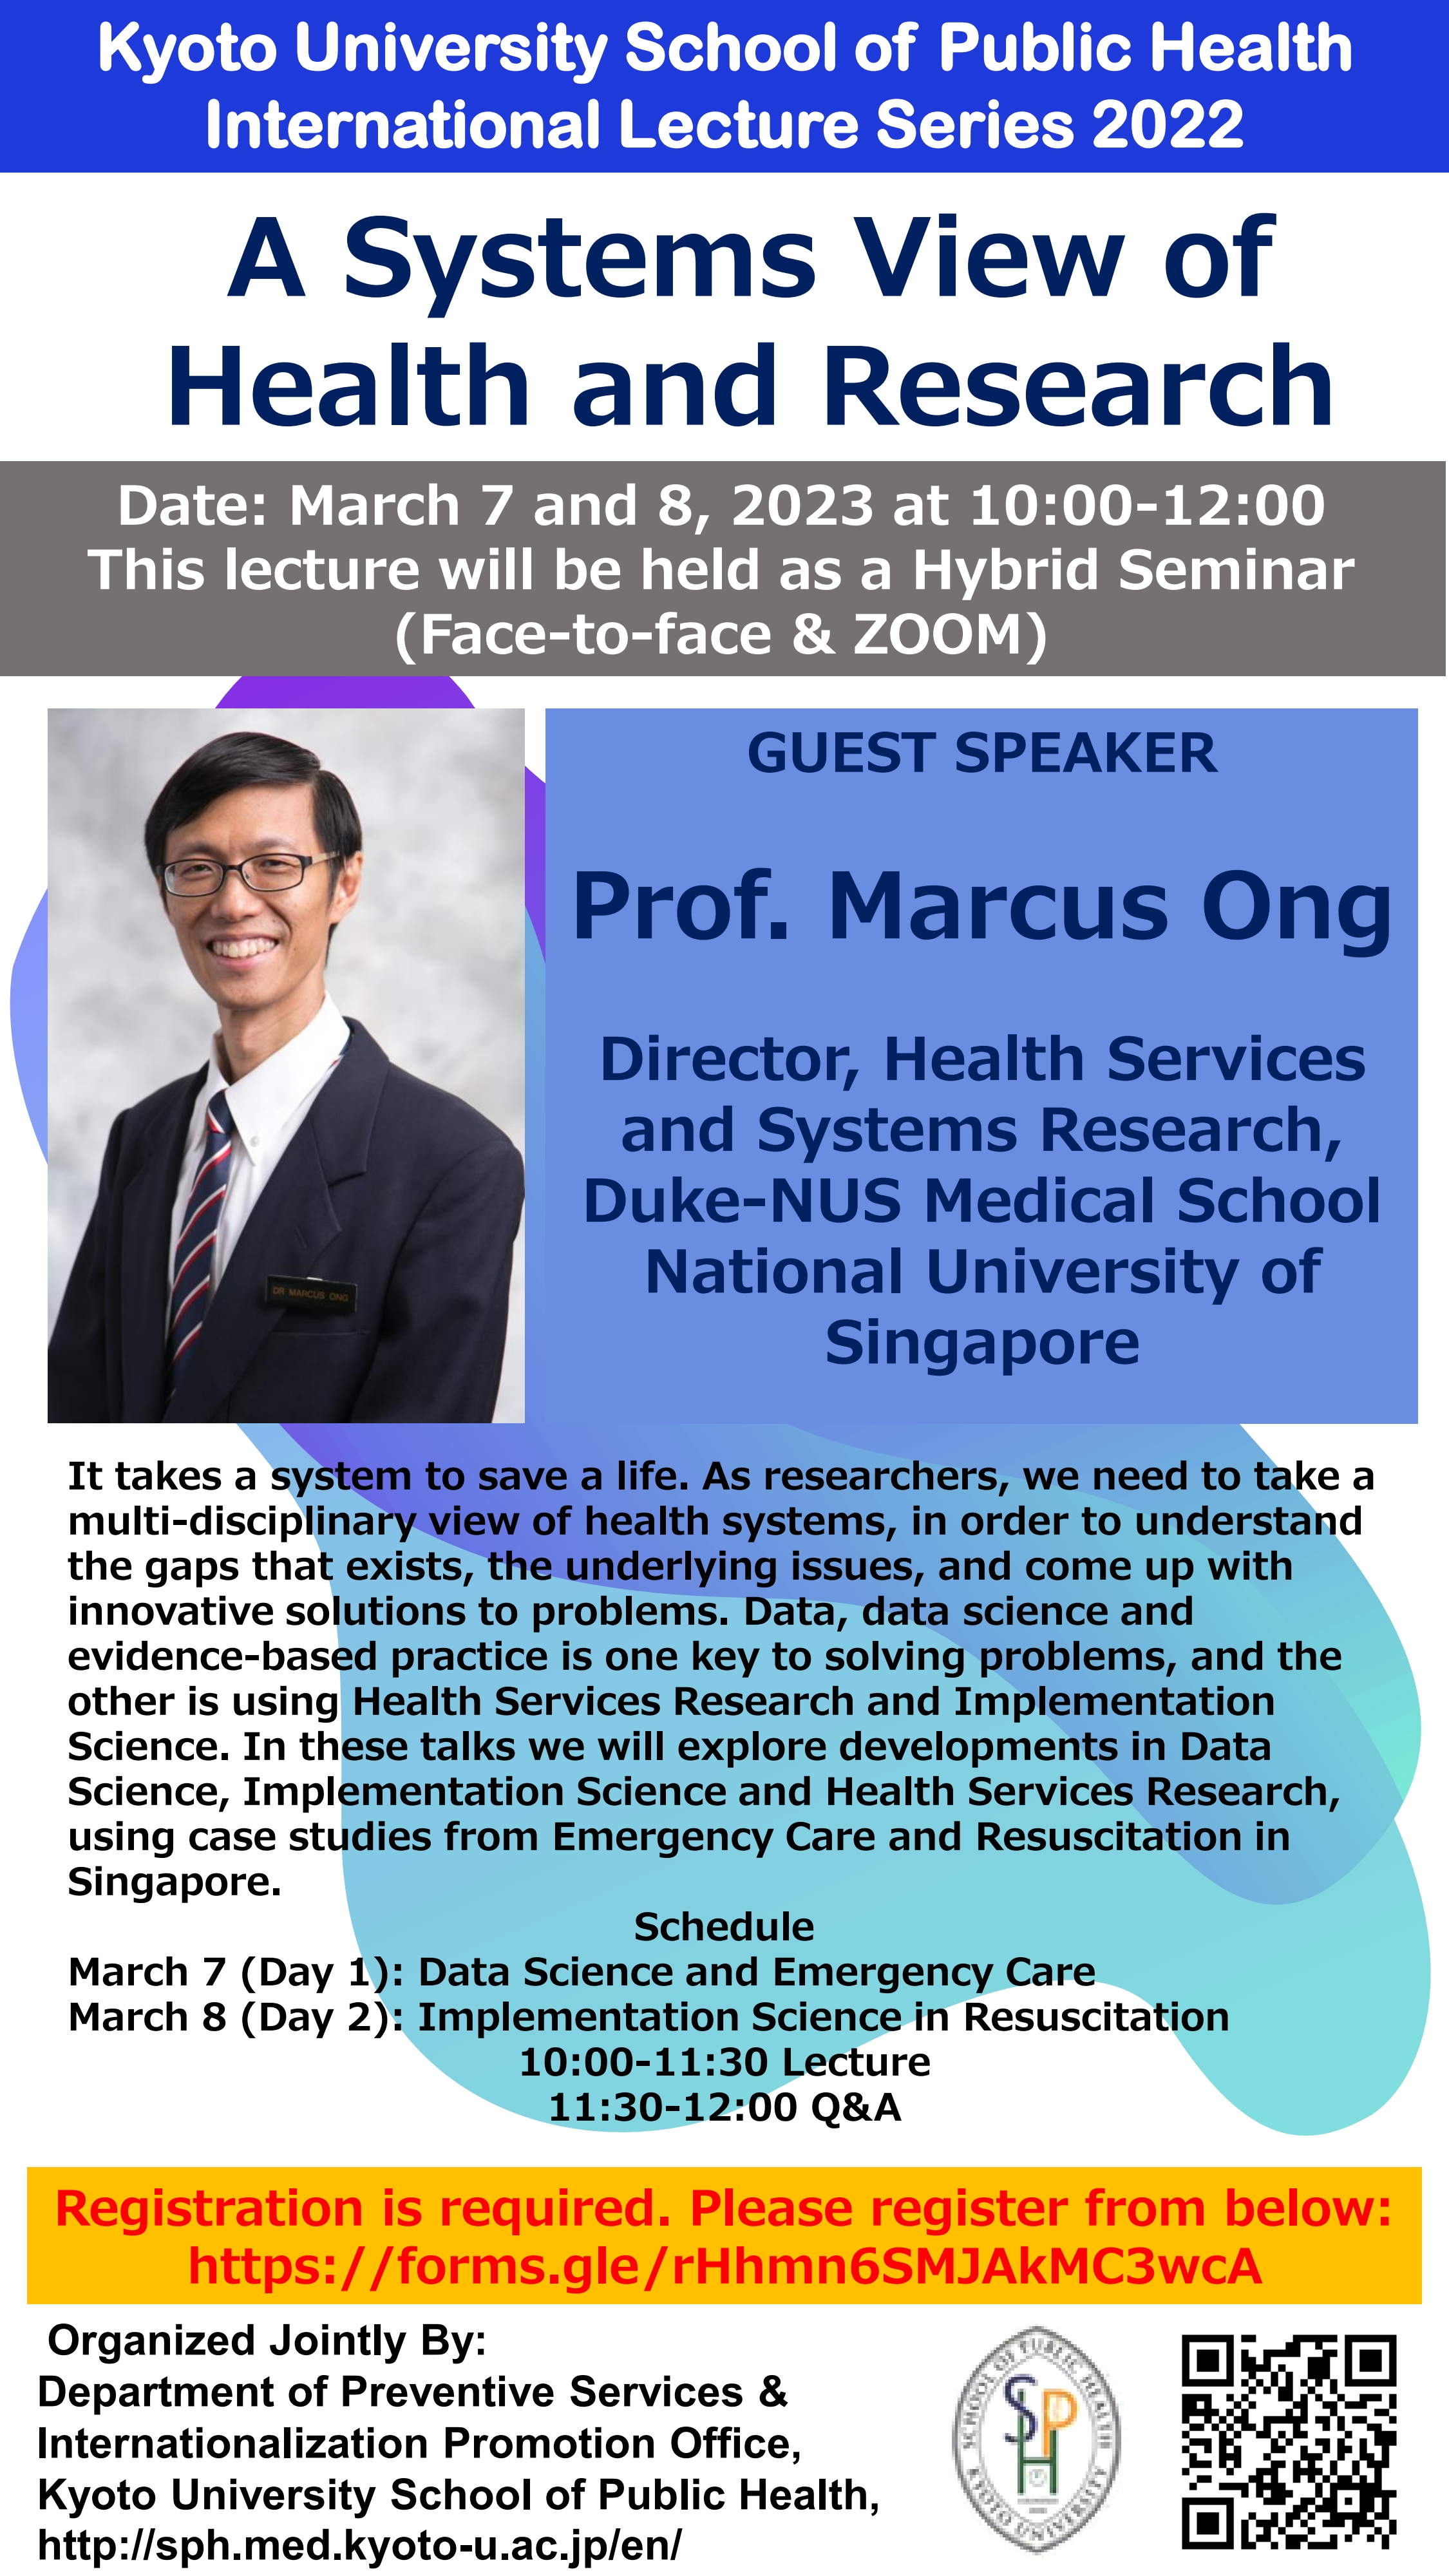 20221220KUSPH_IL_Flyer(Prof.Ong)